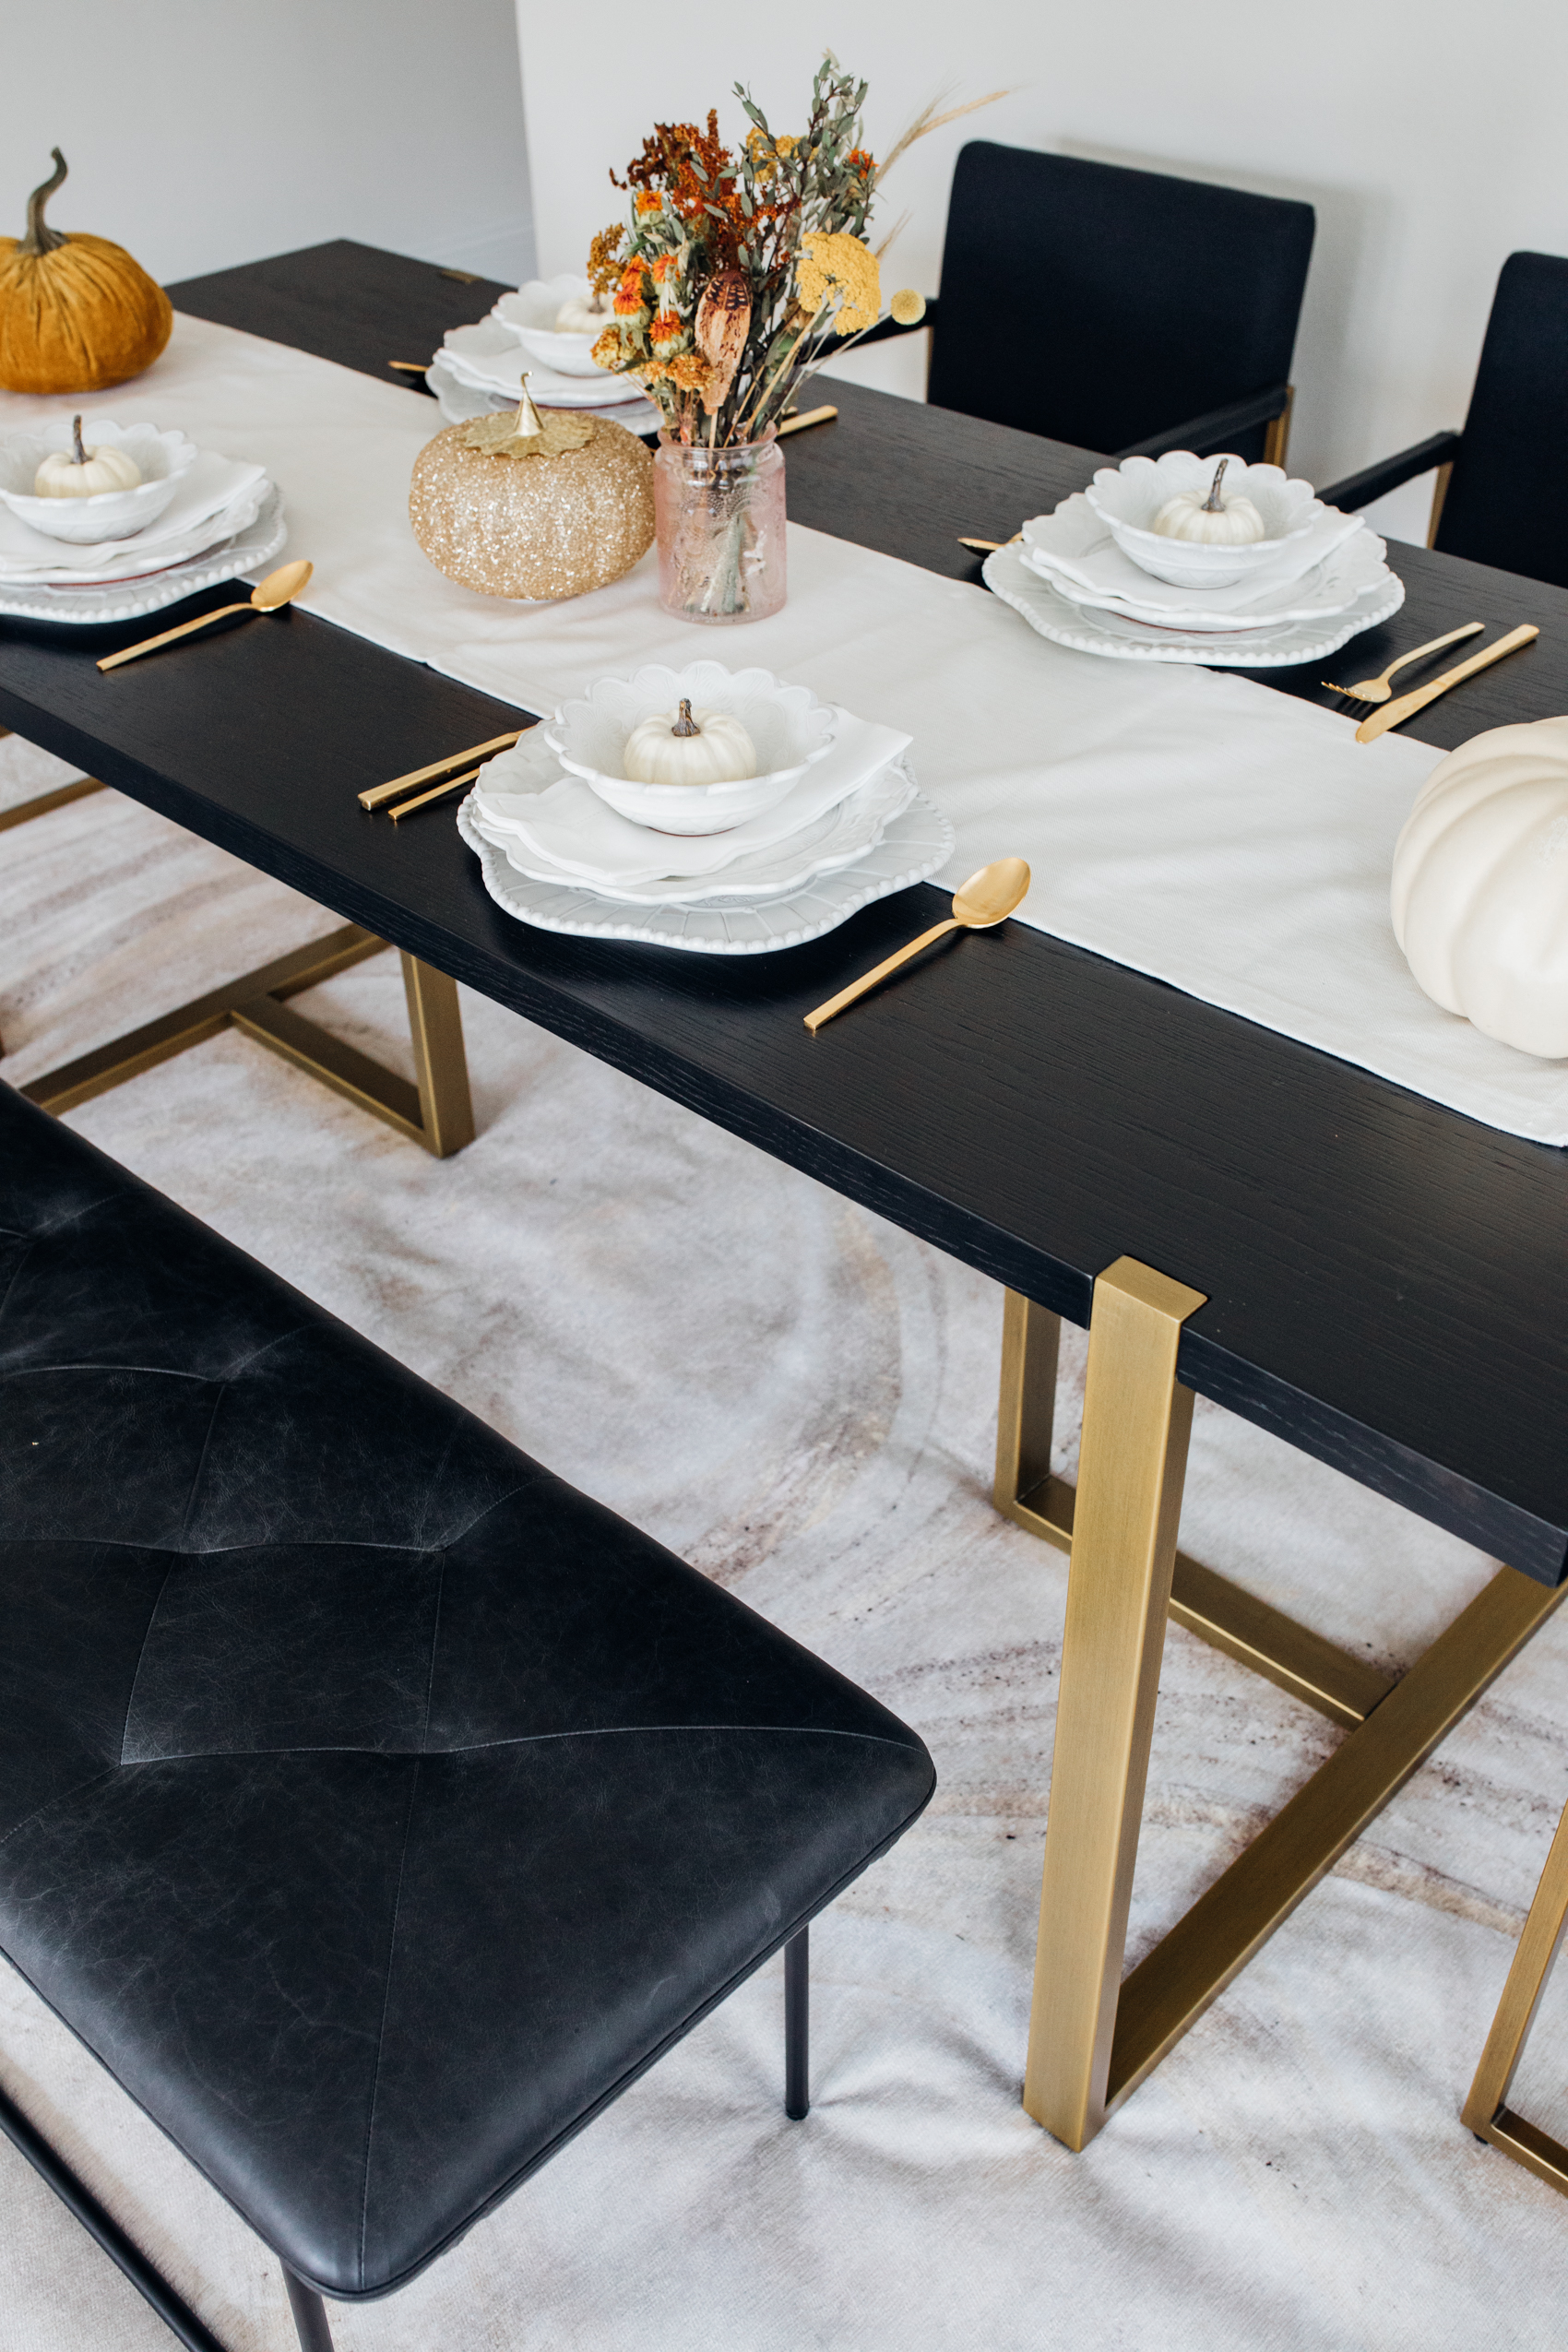 Thanksgiving Tablescape with a dining table with gold legs